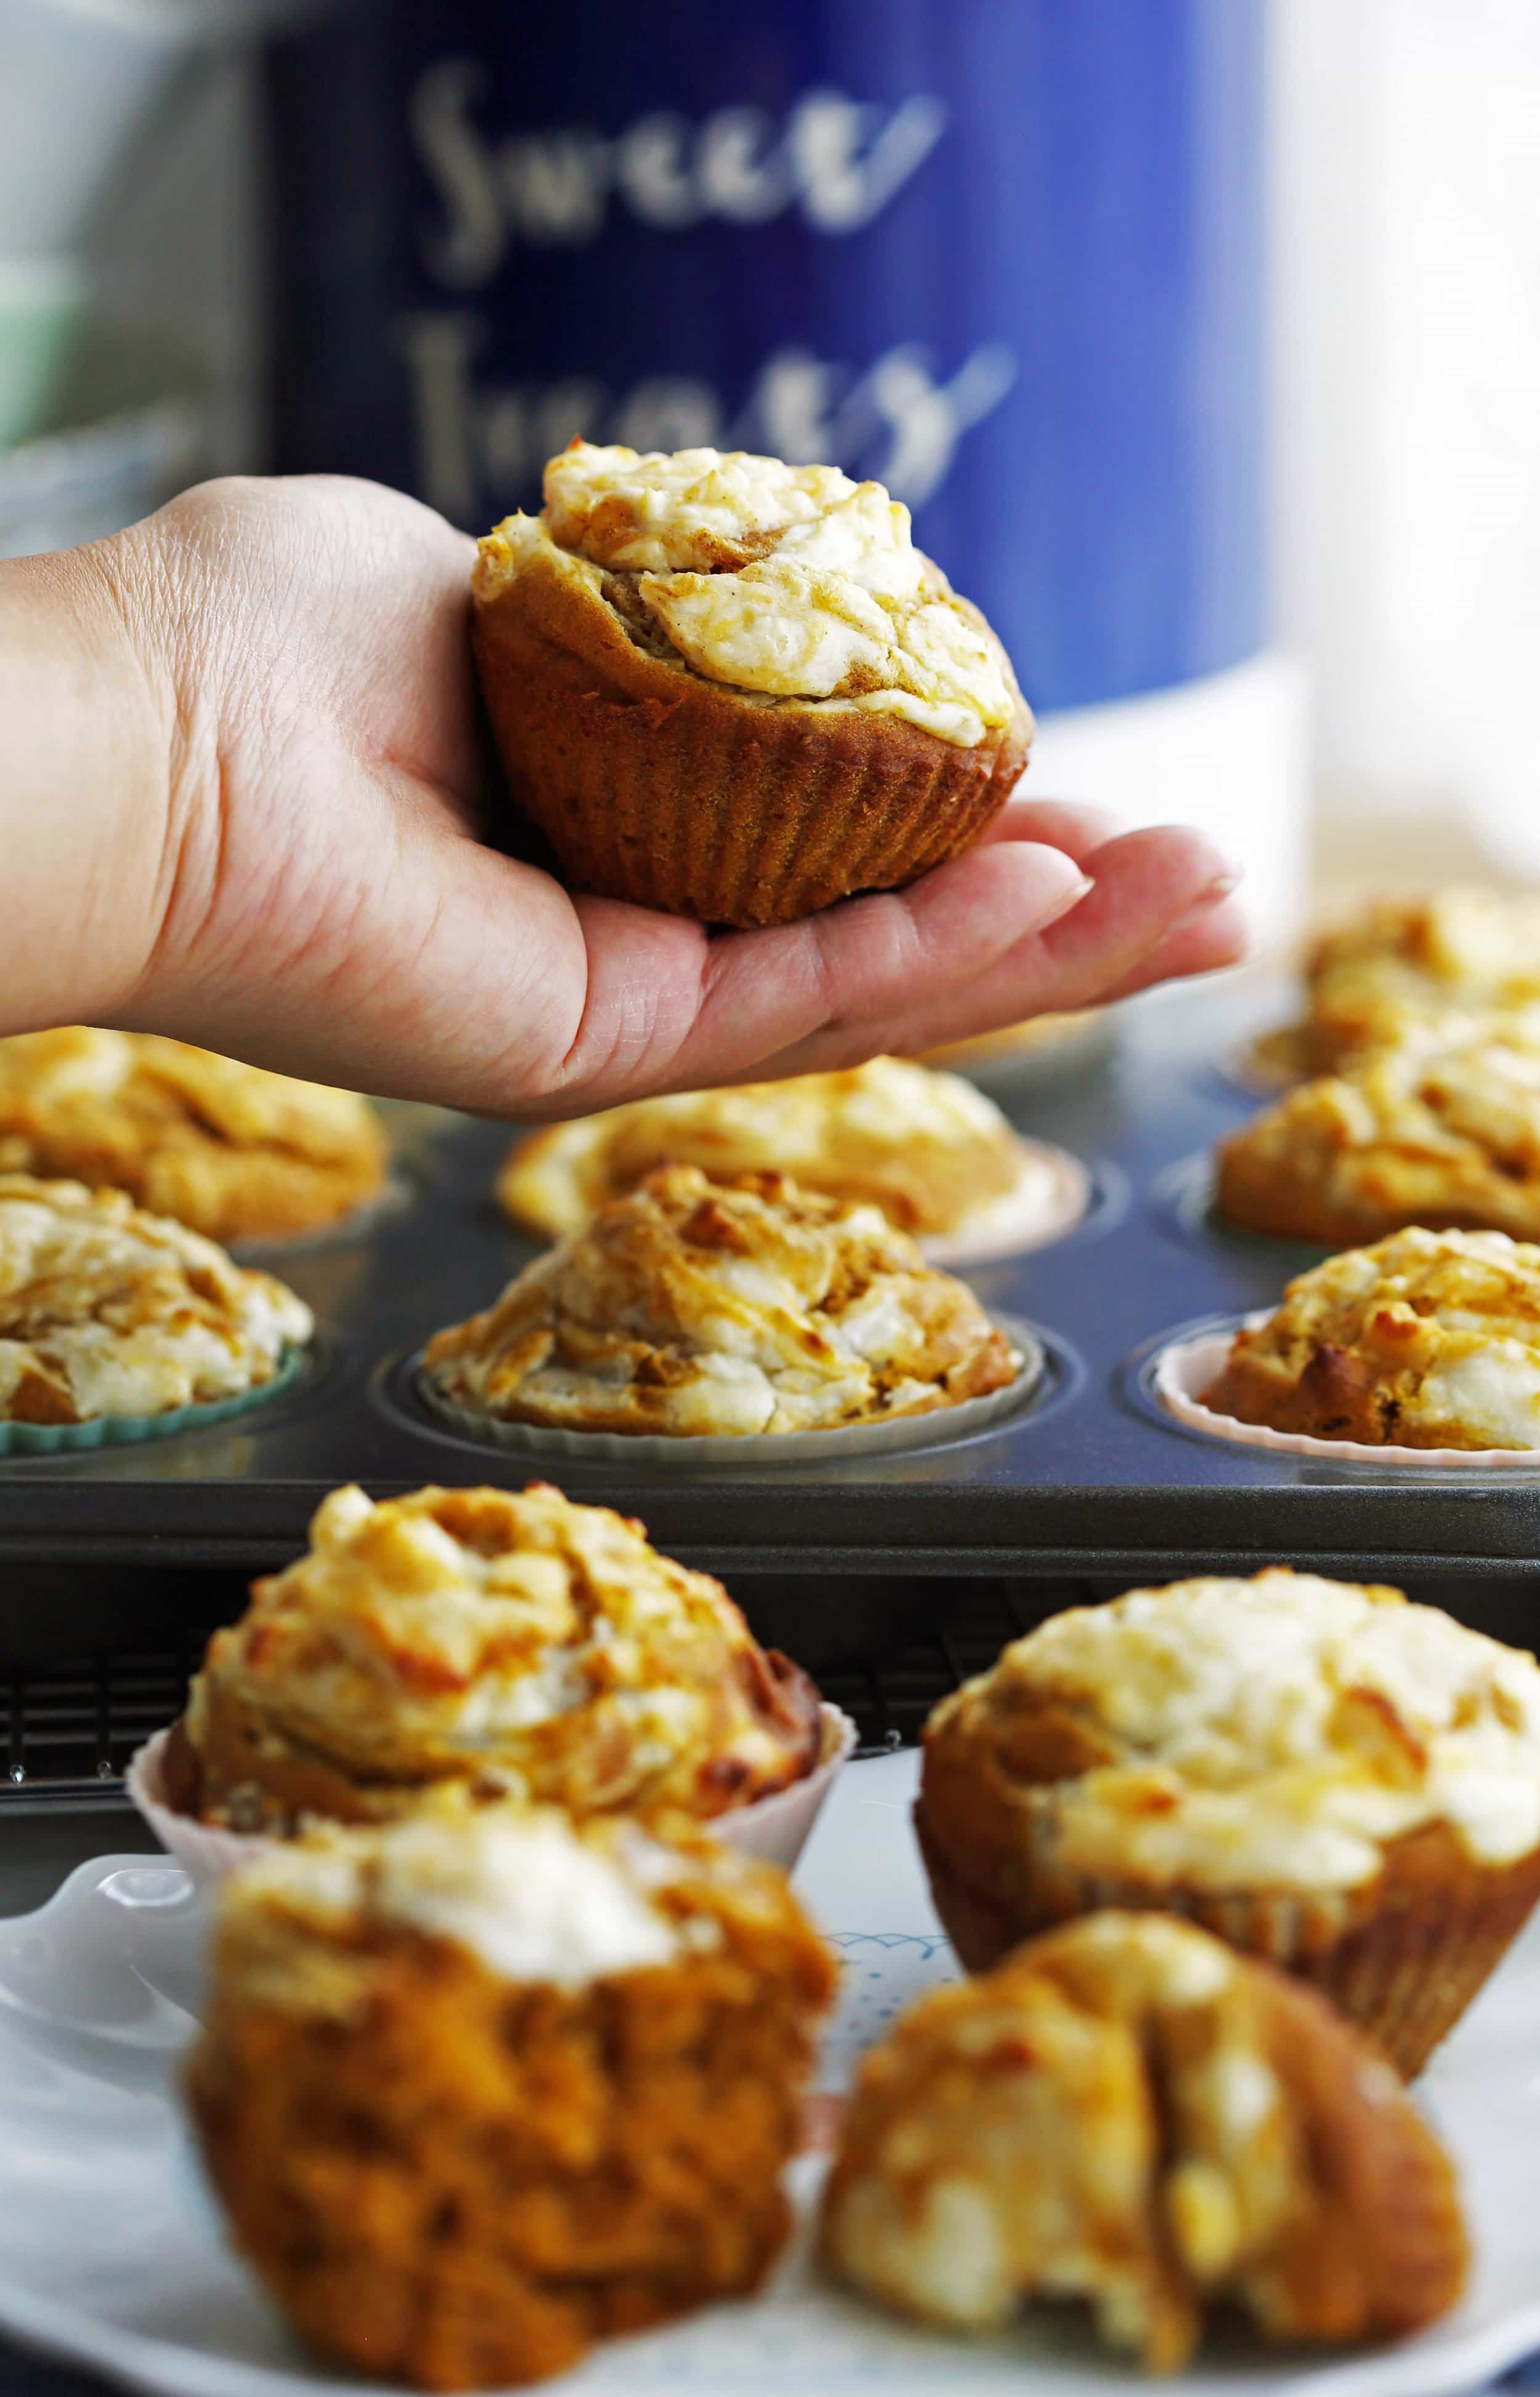 A pumpkin cream cheese muffin held in the palm of a hand with more muffins on a plate and muffin pan too.